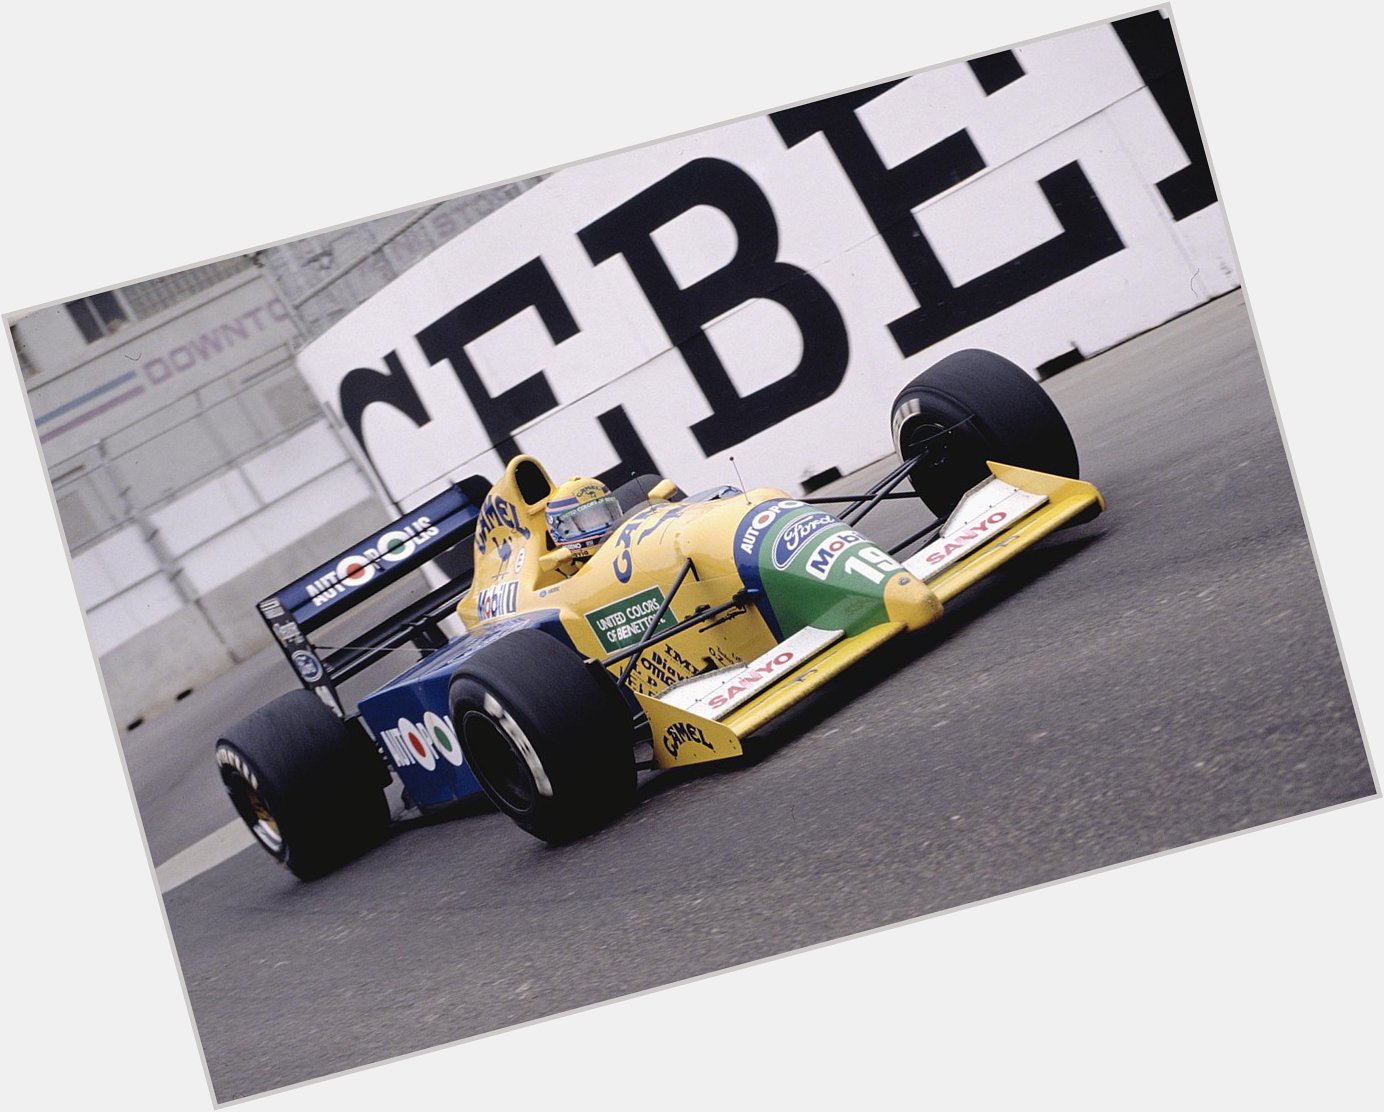 Happy birthday Roberto Moreno!

The Brazilian raced for Benetton in \90-91, finishing 2nd on his debut in Japan. 